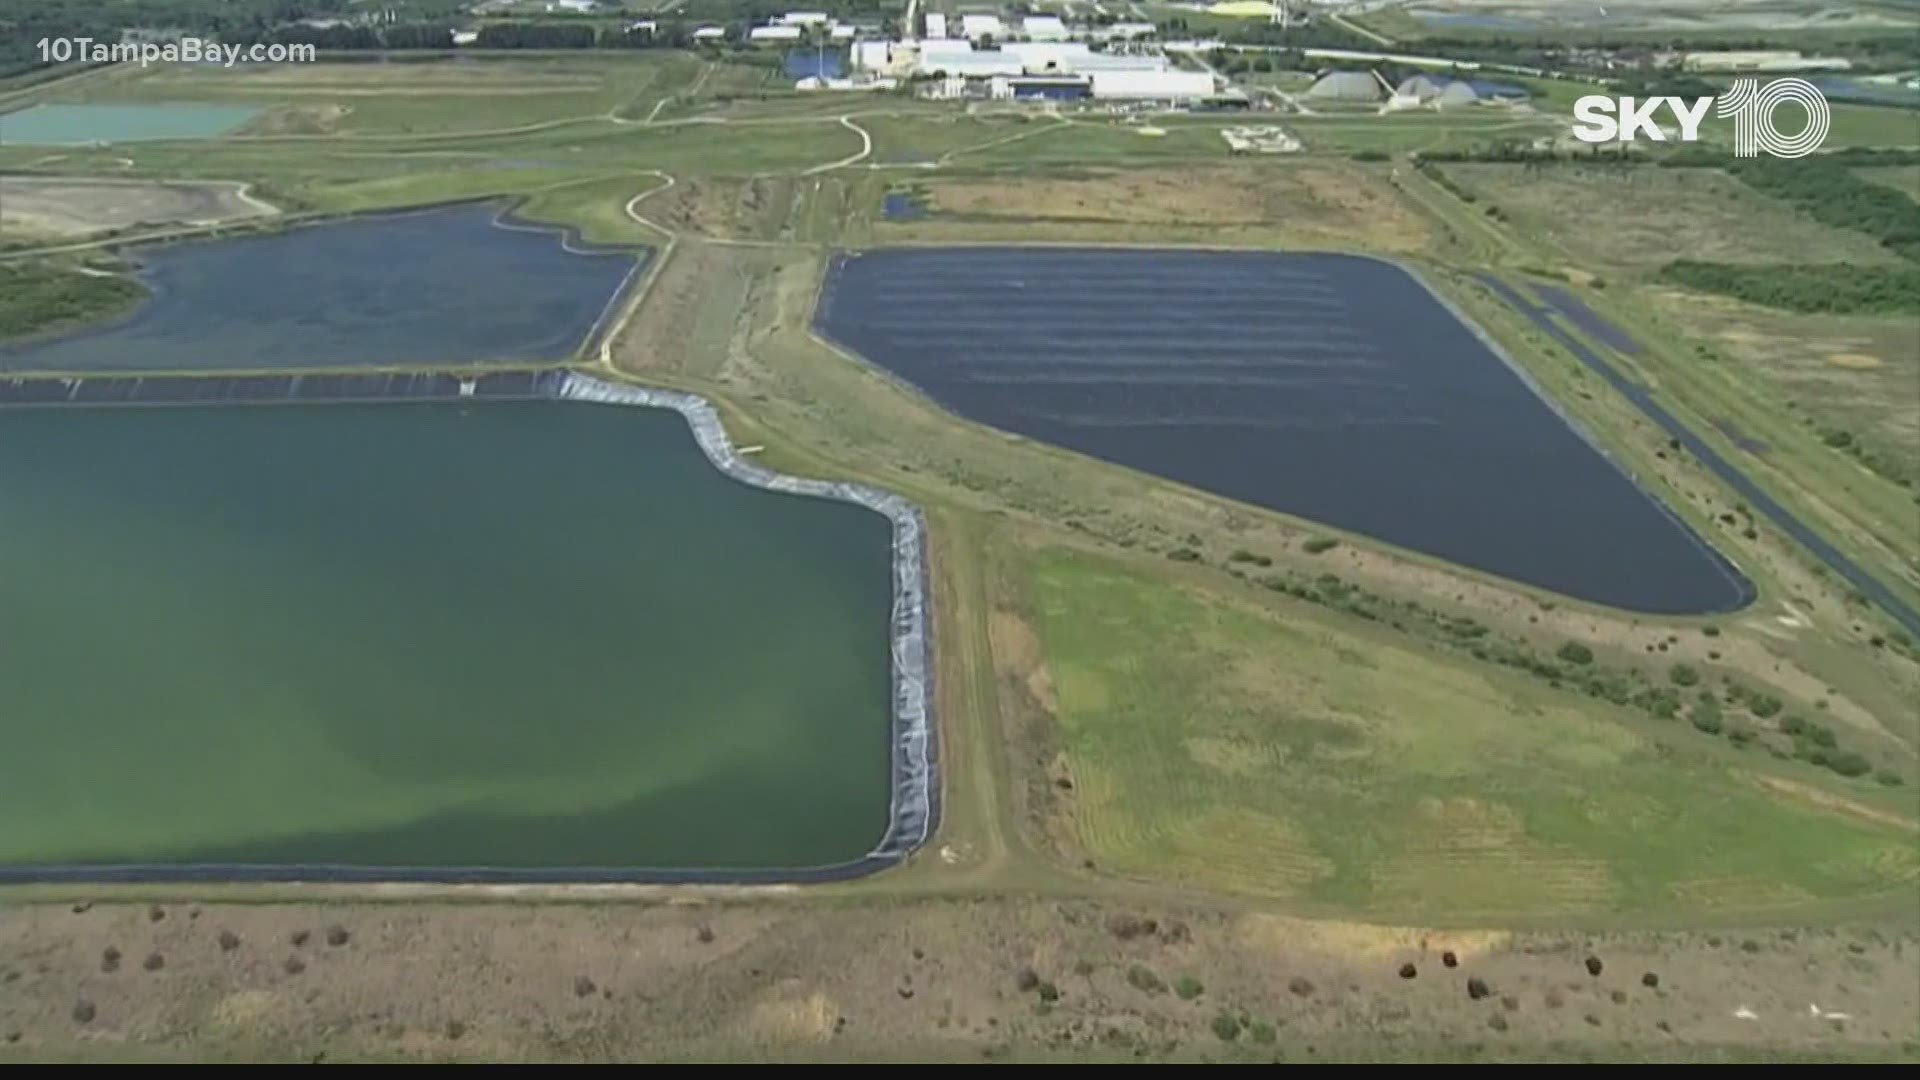 Florida state and local leaders fear an "imminent" collapse of the retention pond at the former Piney Point phosphate processing plant in Manatee County.